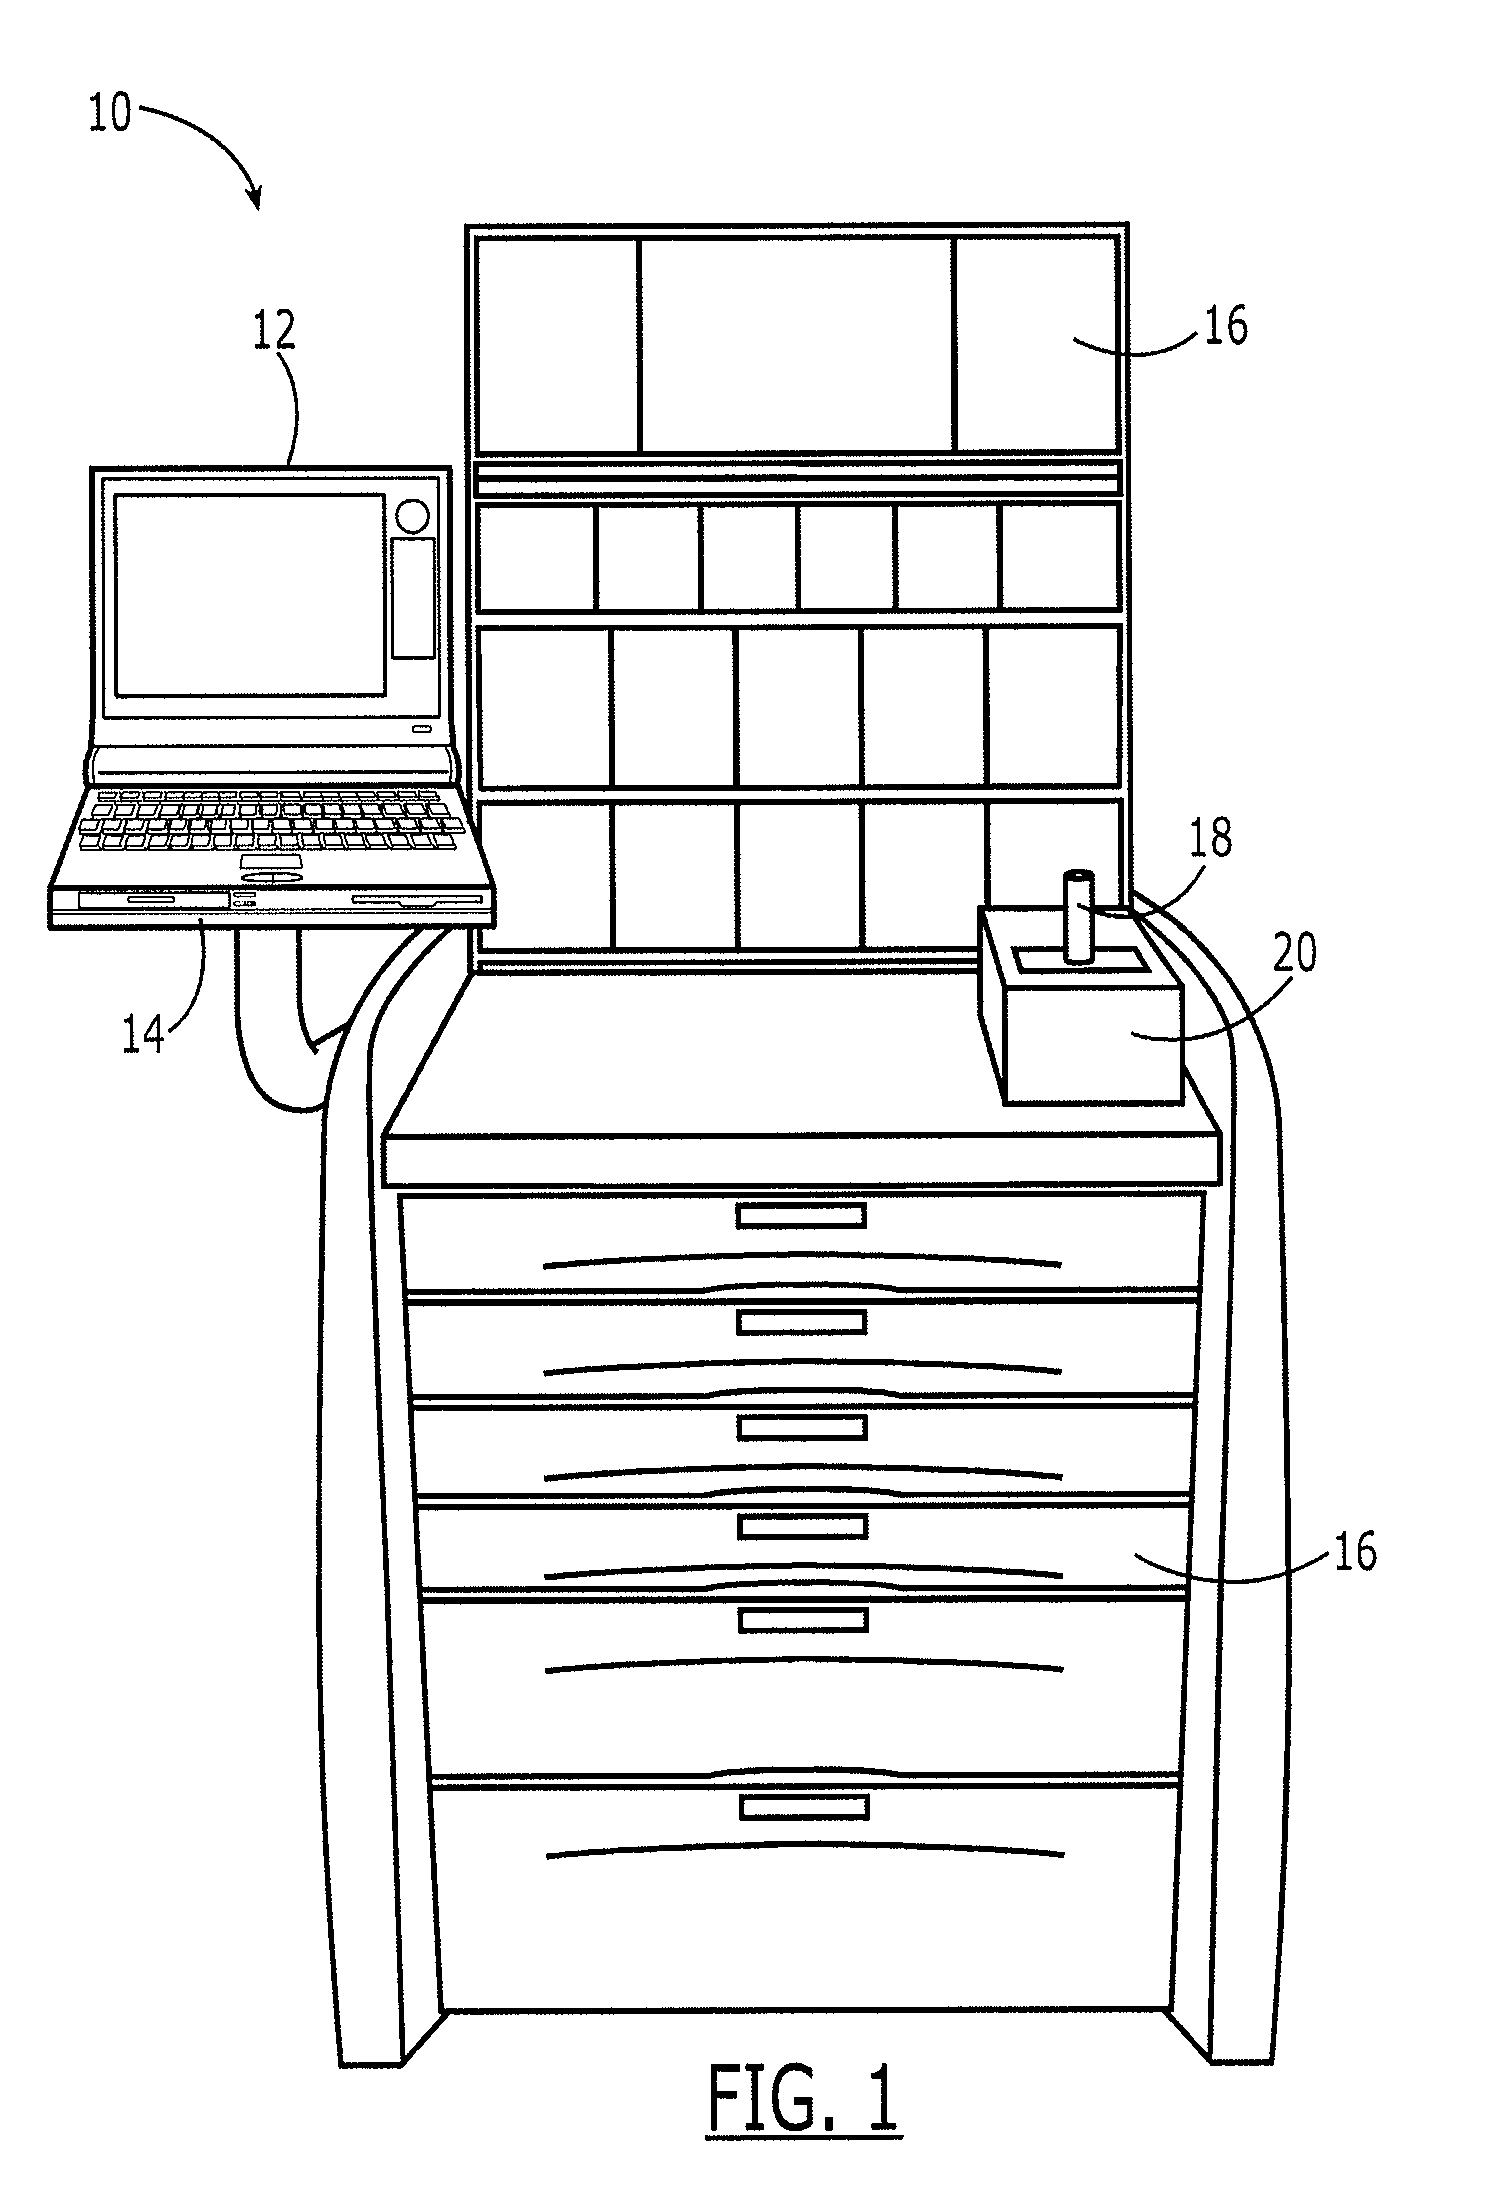 Visibly-Coded Medication Label And Associated Method, Apparatus And Computer Program Product For Providing Same